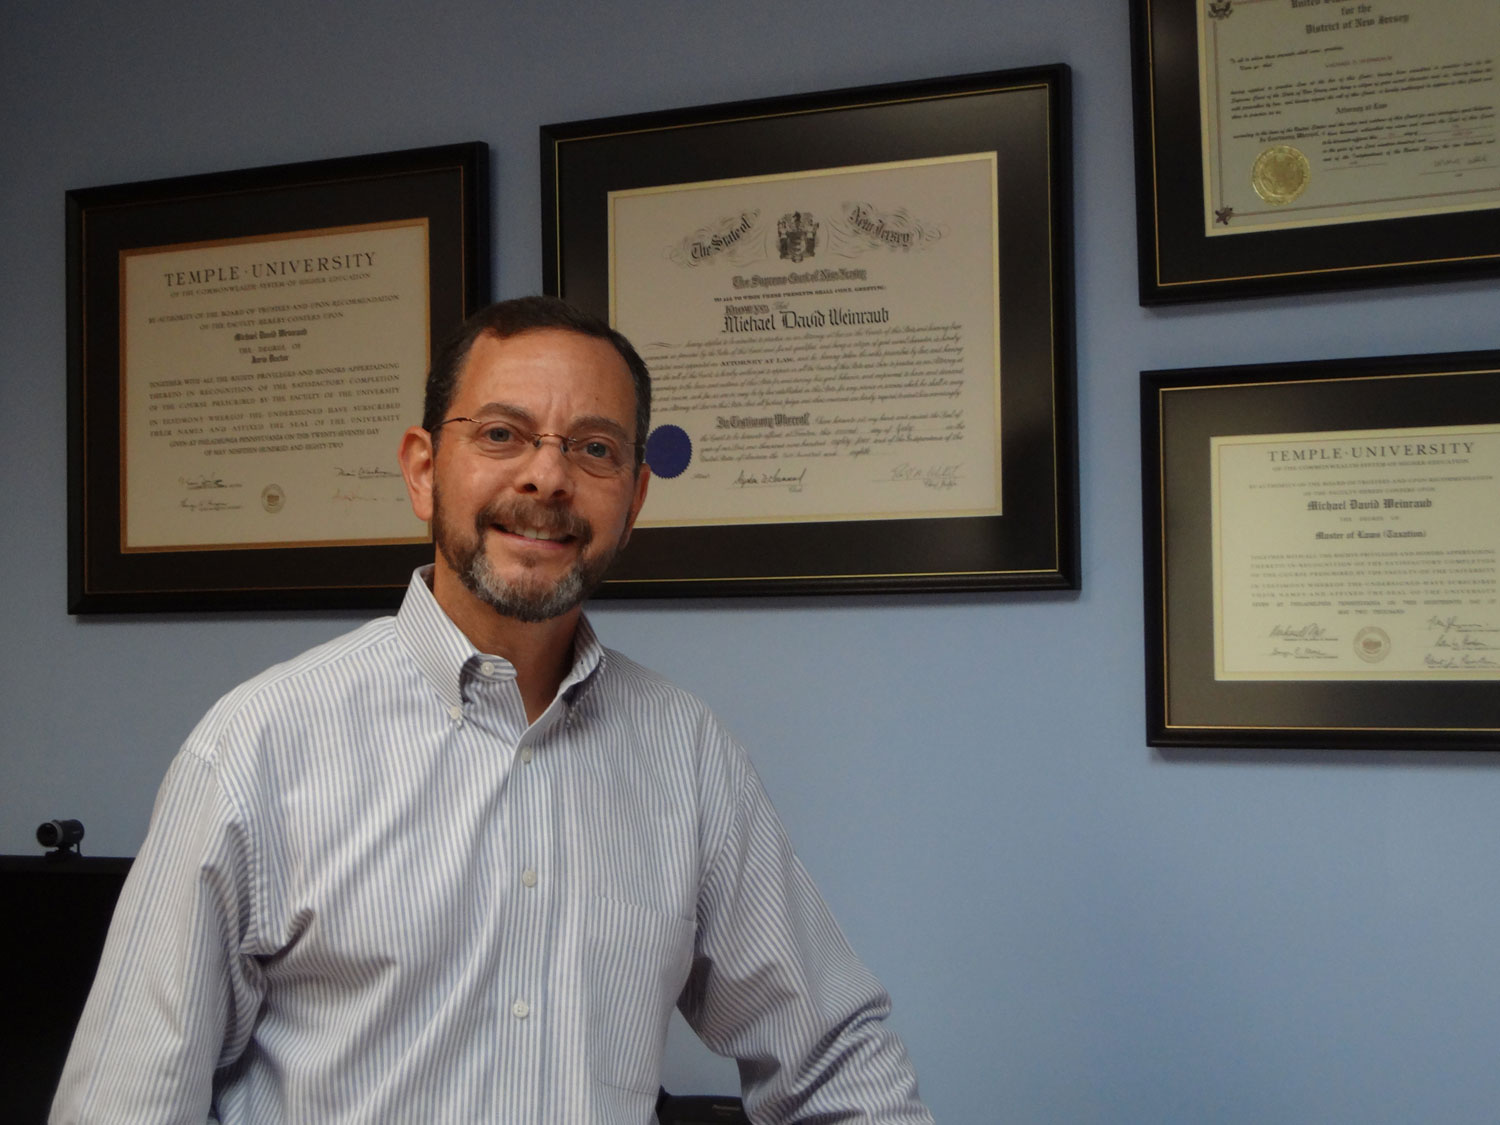 A Photo of Michael D. Weinraub in his office